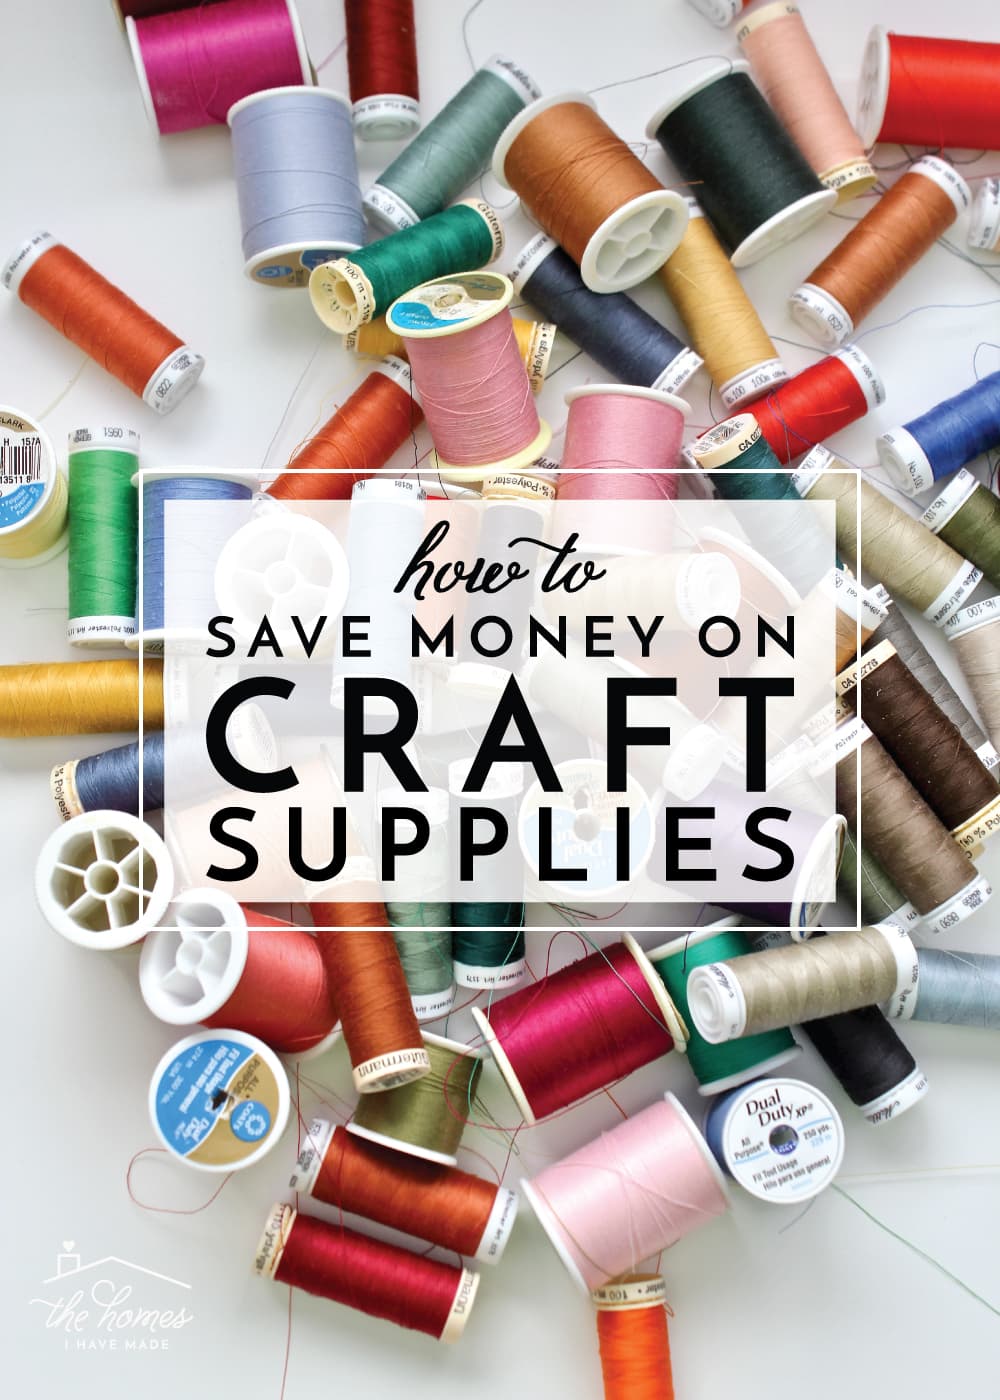 Learn how to save money on craft supplies with these smart and easy tricks!